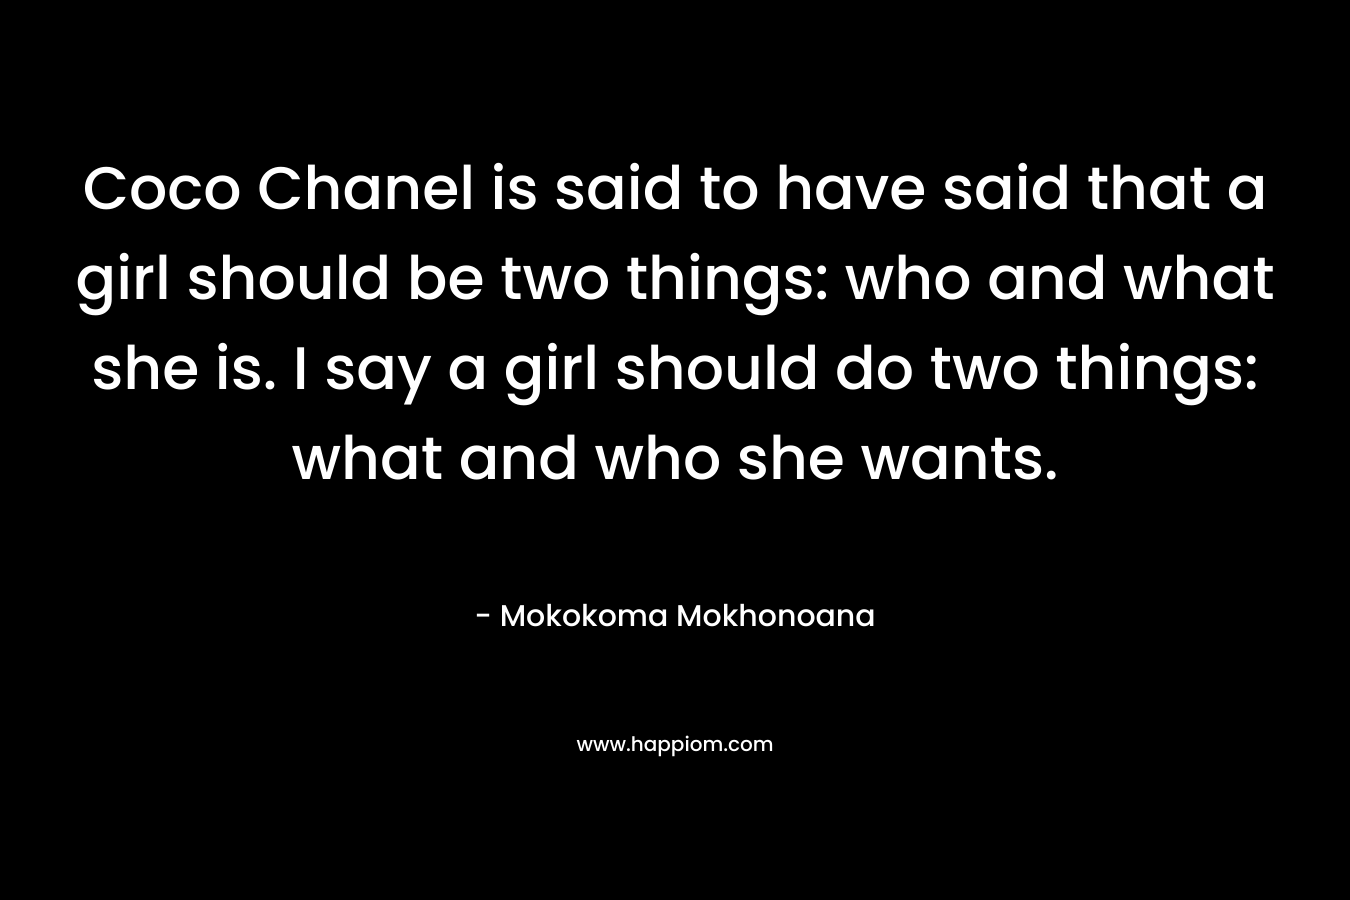 Coco Chanel is said to have said that a girl should be two things: who and what she is. I say a girl should do two things: what and who she wants. – Mokokoma Mokhonoana